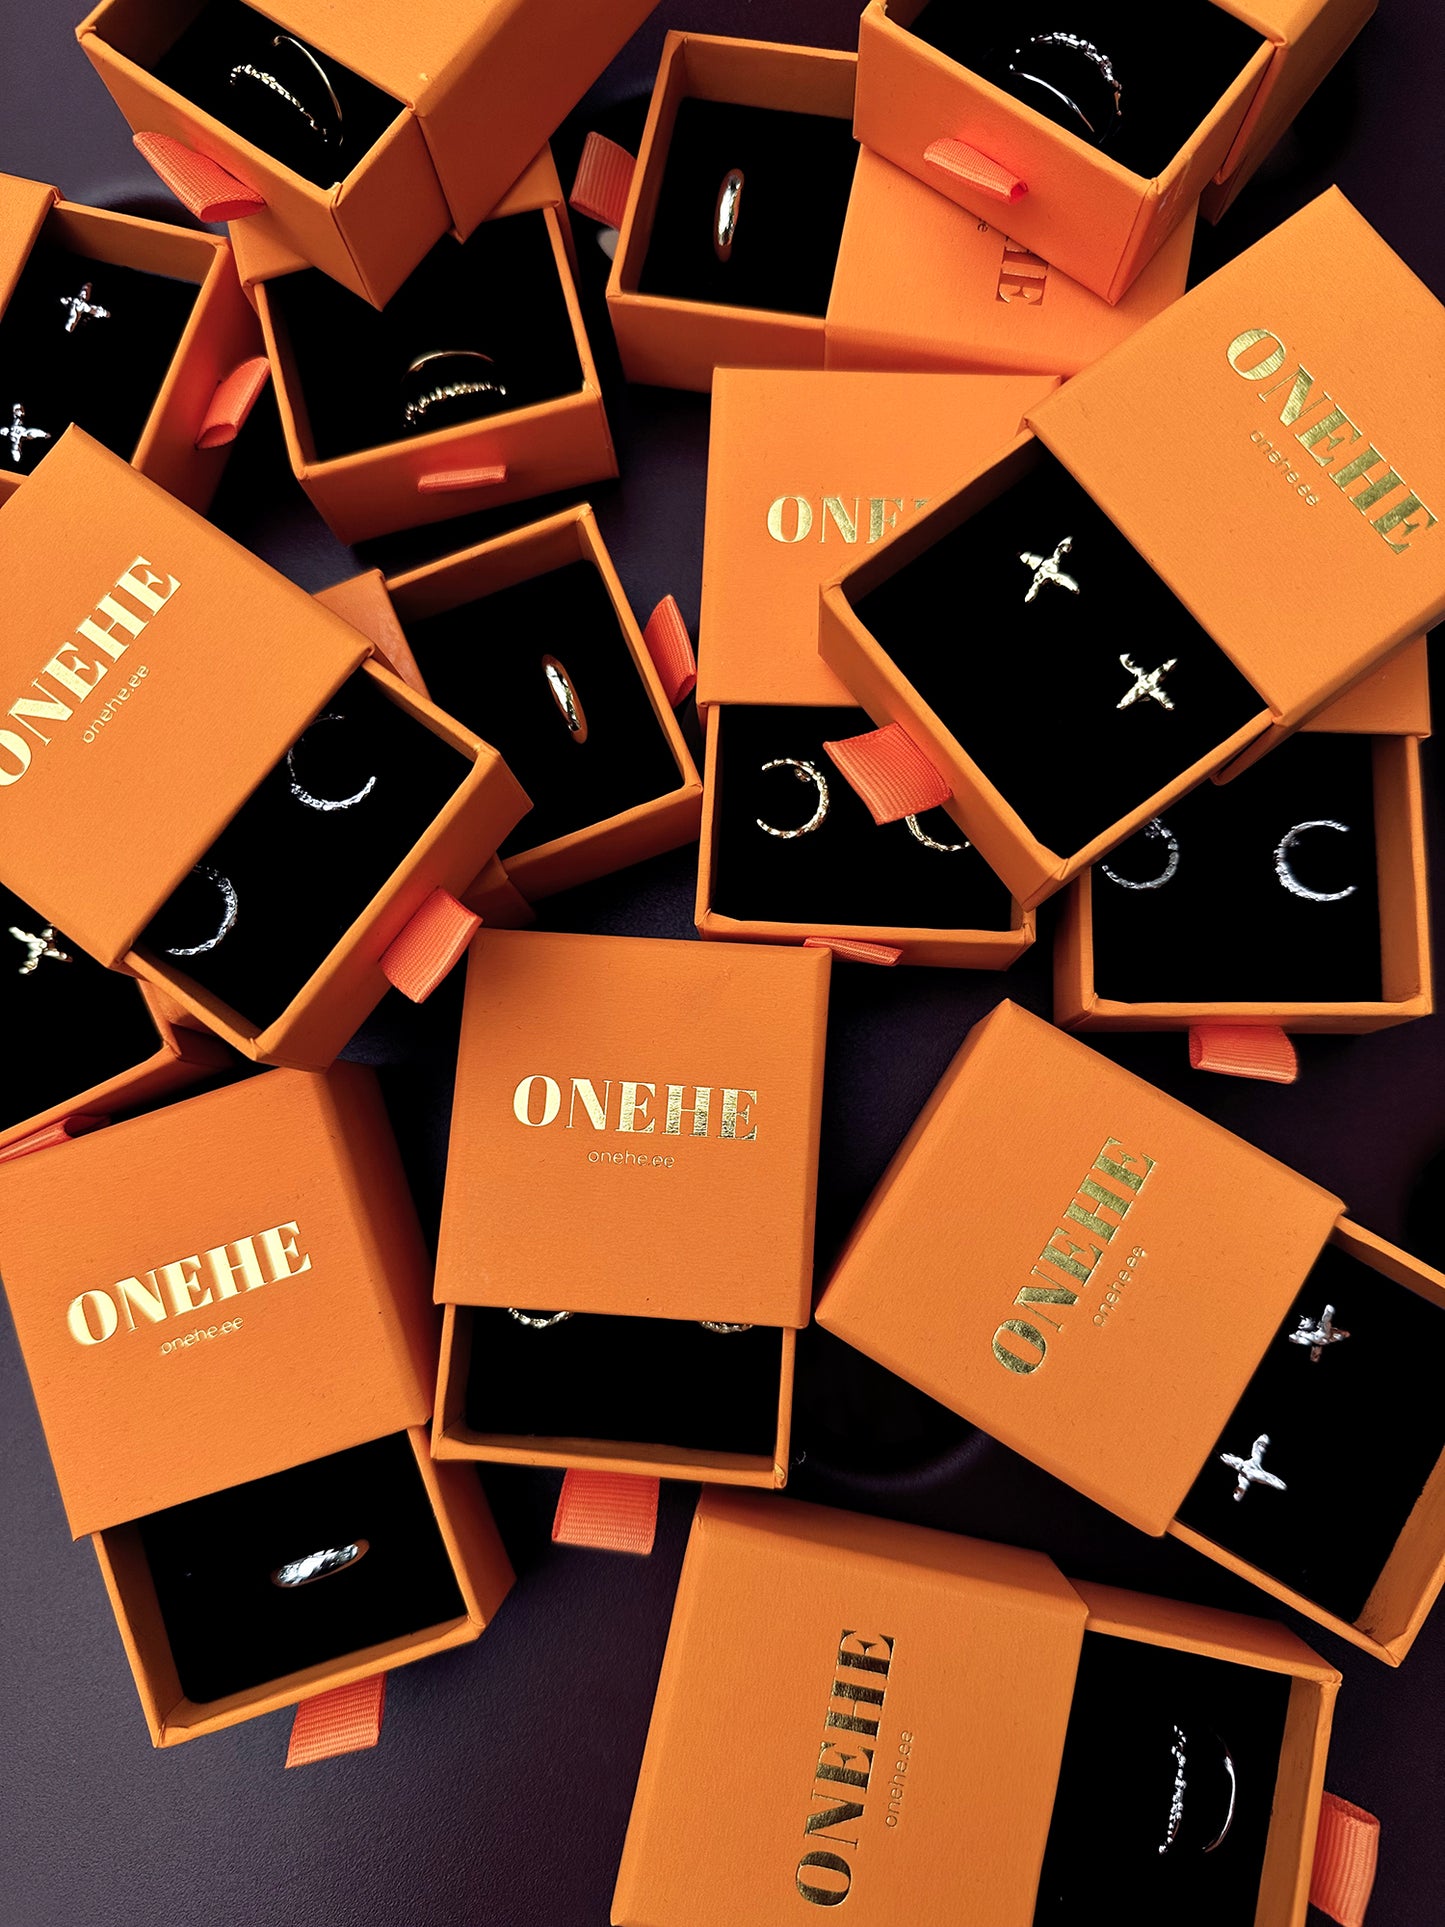 Onehe jewelry packaging